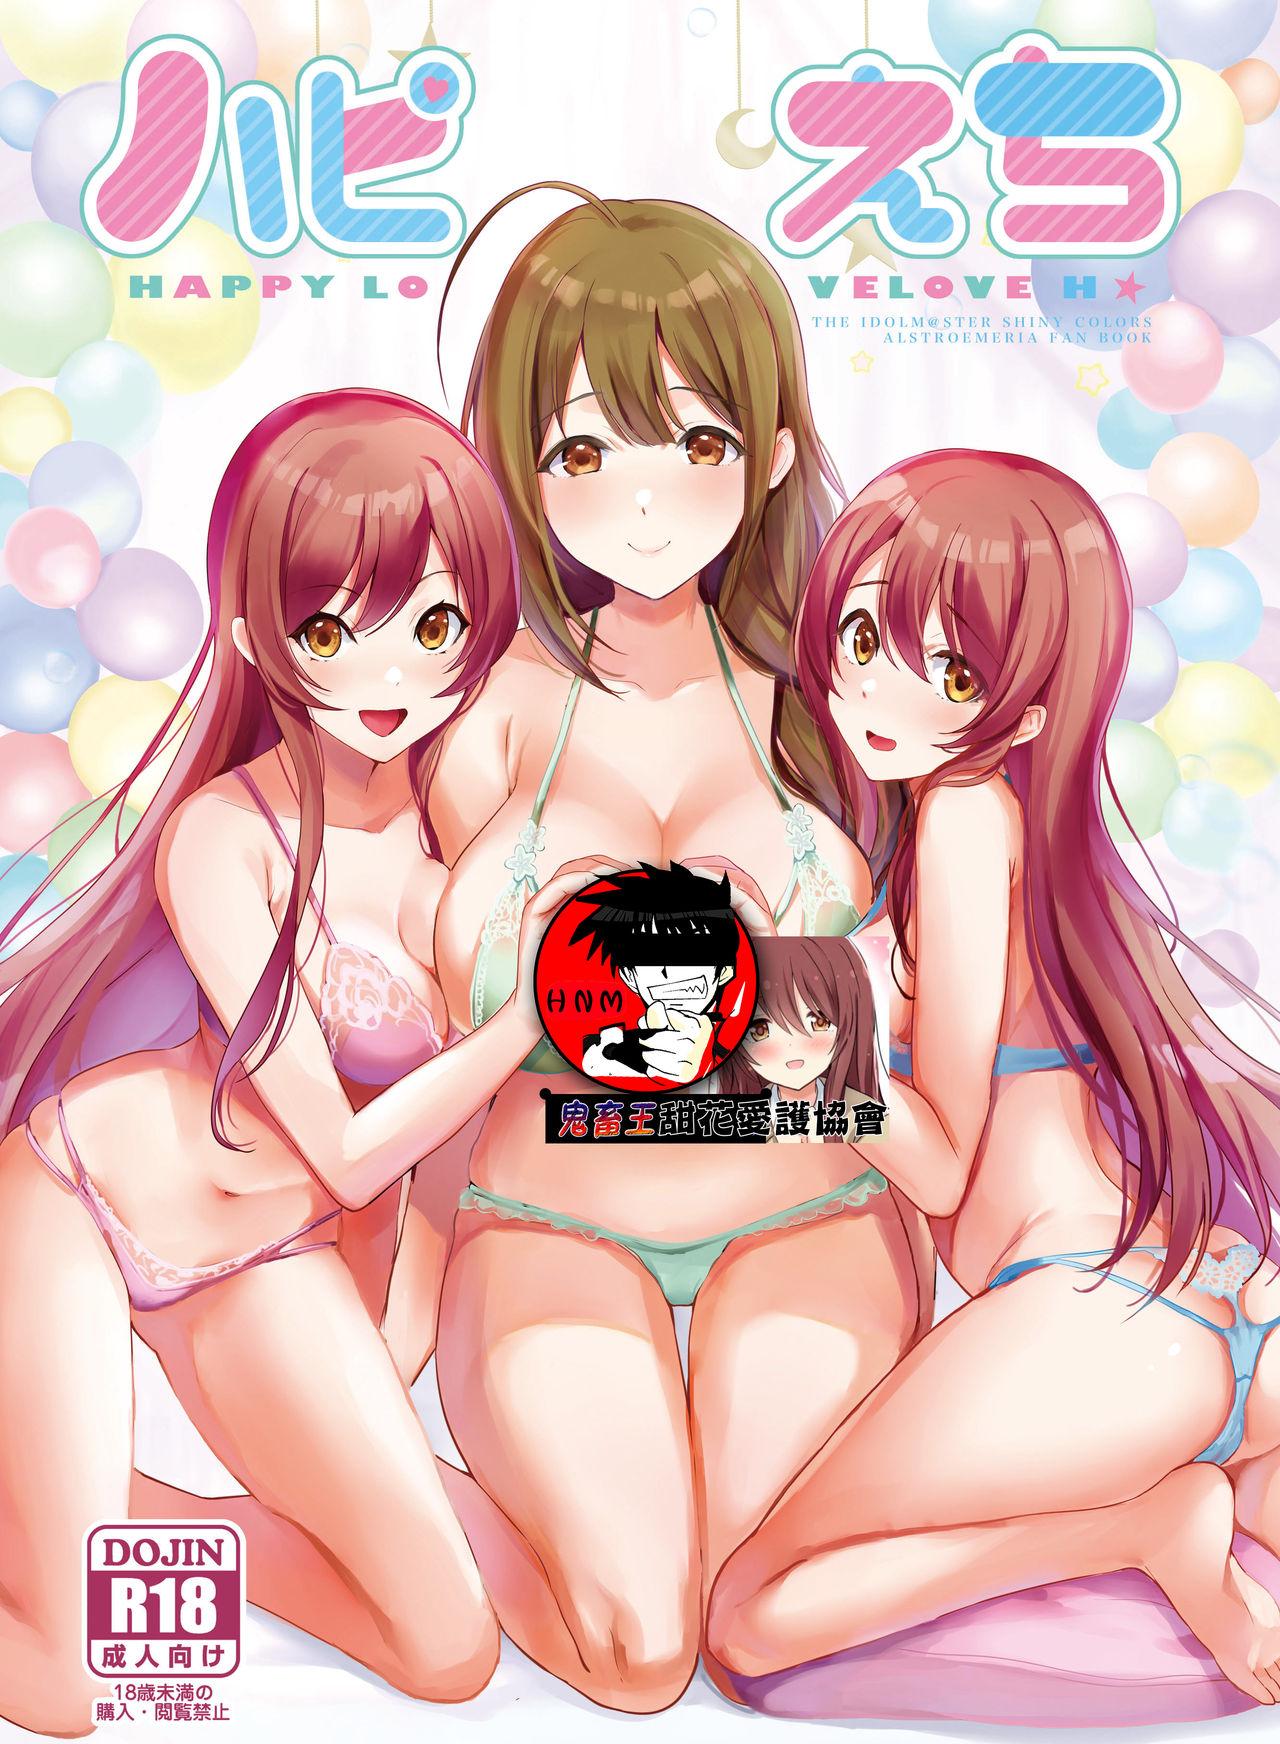 Red HAPPY LOVELOVE H - The idolmaster Porn - Picture 1